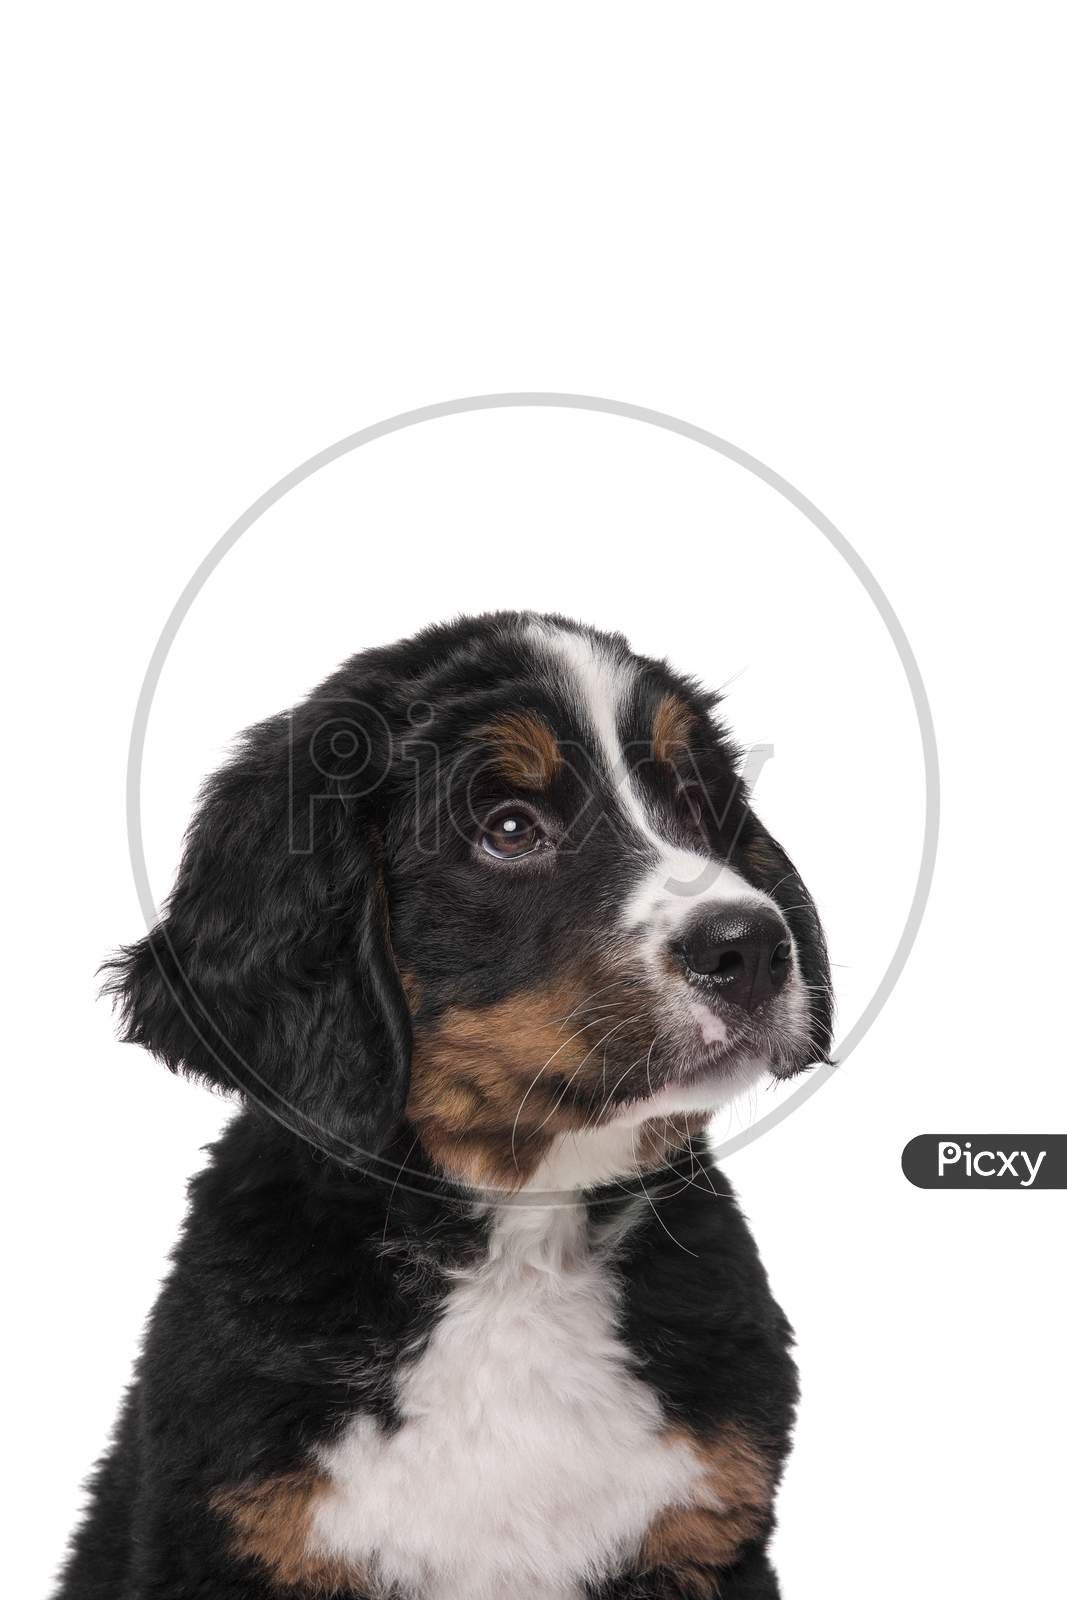 Portrait Of A Bernese Mountain Dog Puppy Looking Up On A White Background